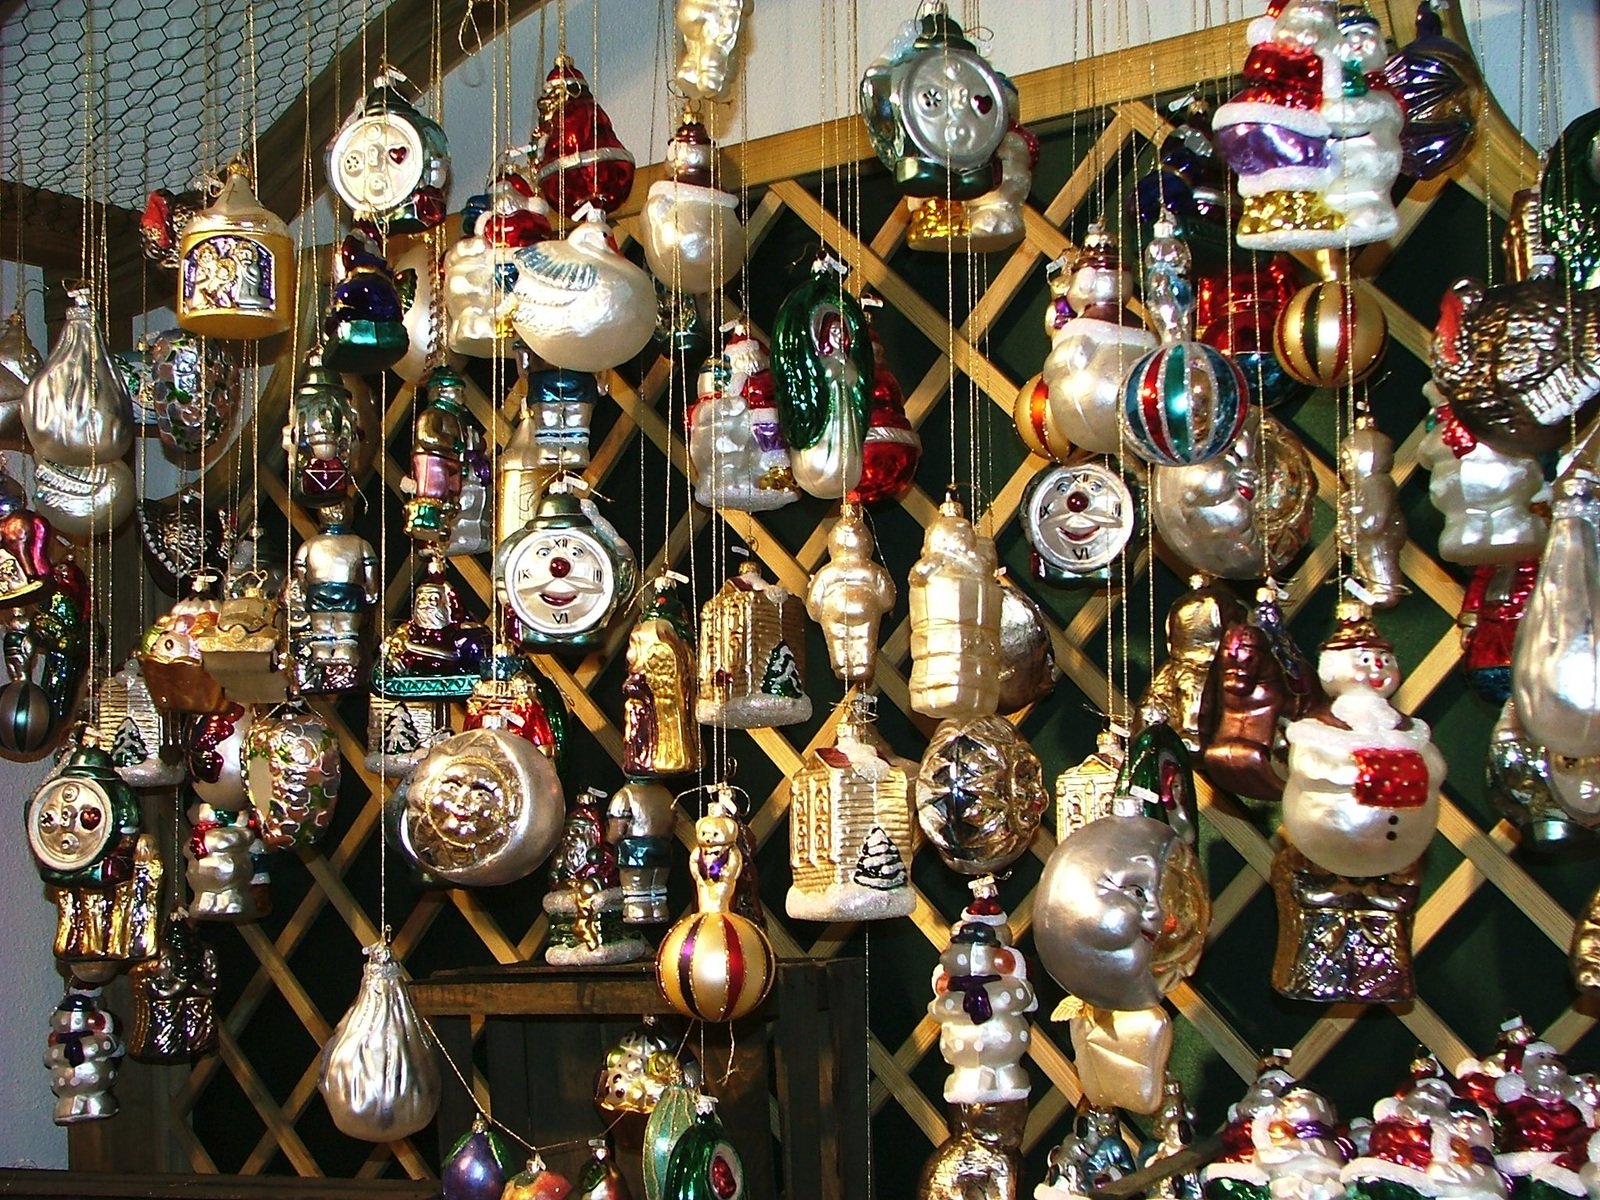 the display is decorated with a large assortment of ornaments